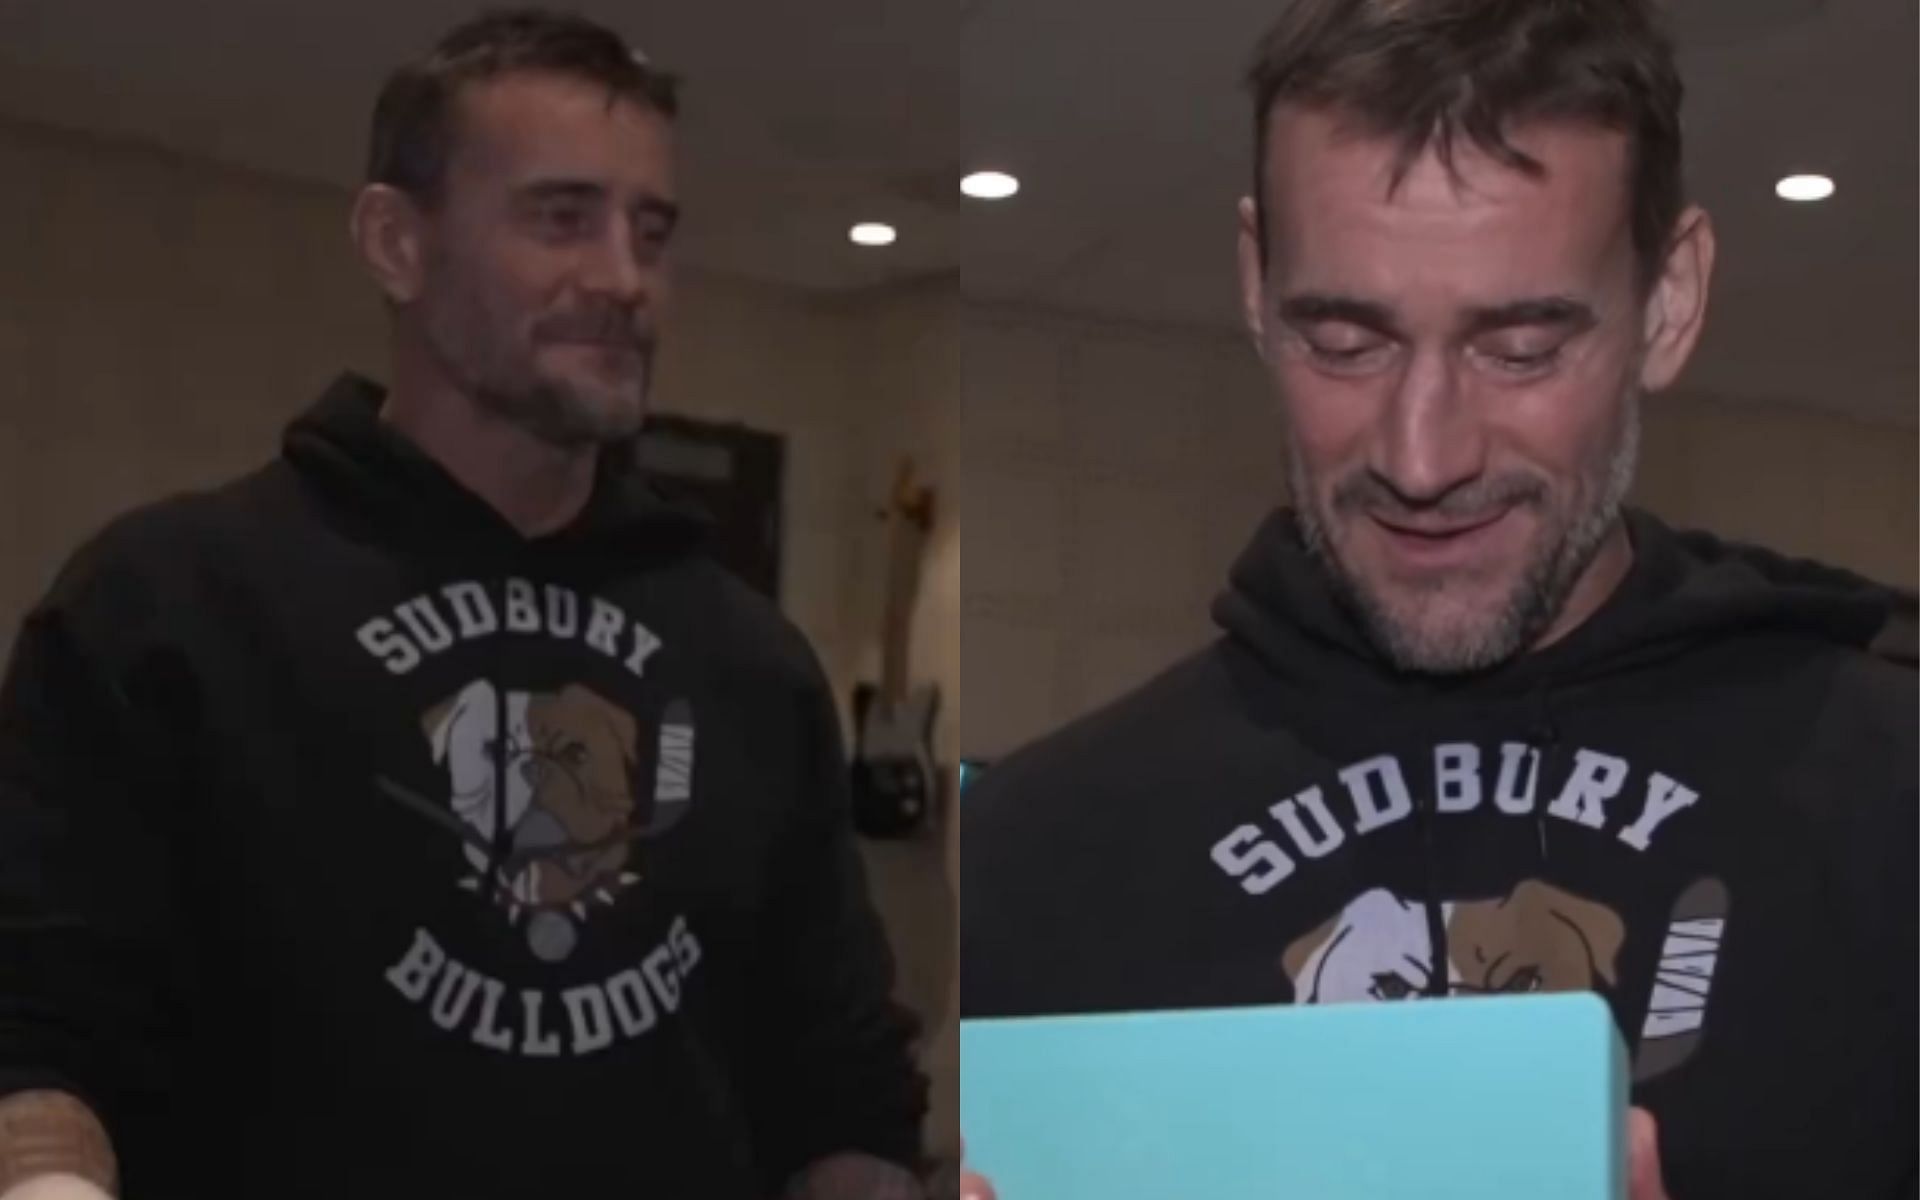 CM Punk [Pictured] was given a special gift from Madison Square Garden [Image courtesy: @WWE - X]